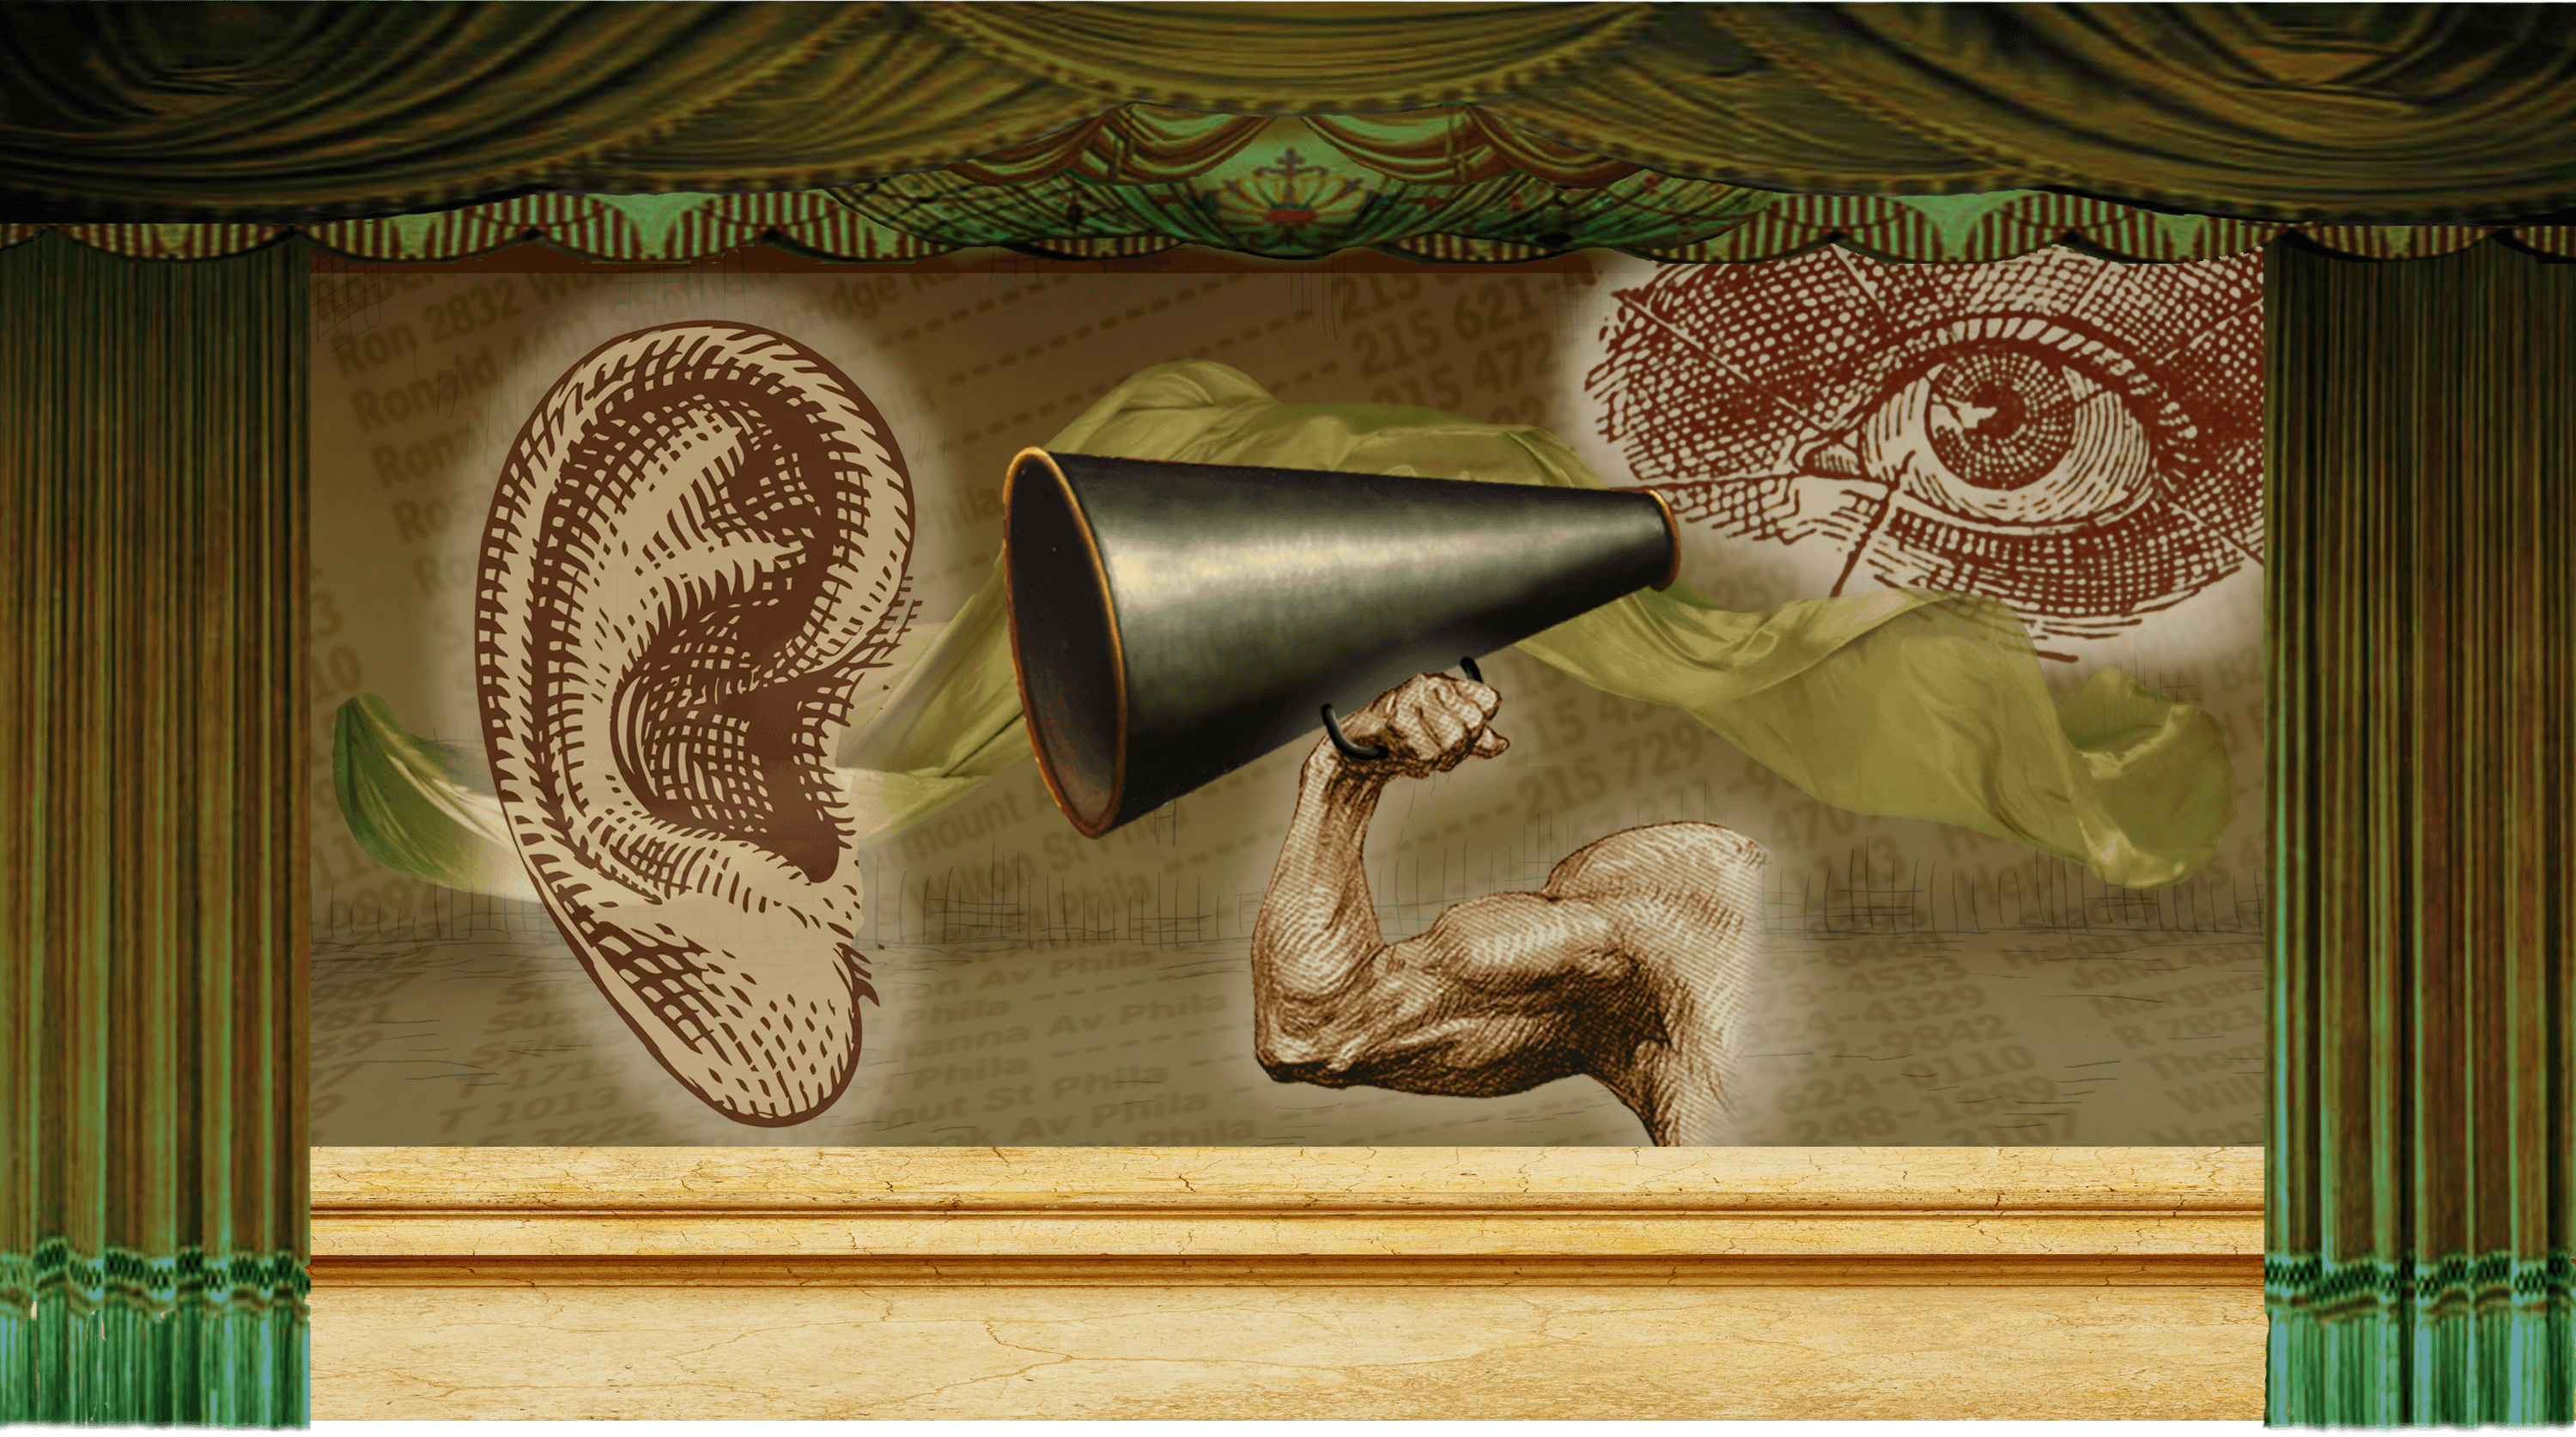 Illustration of an ear, an eye, and a megaphone under drapery. Hidden behind these elements is a faint page of a phone book.